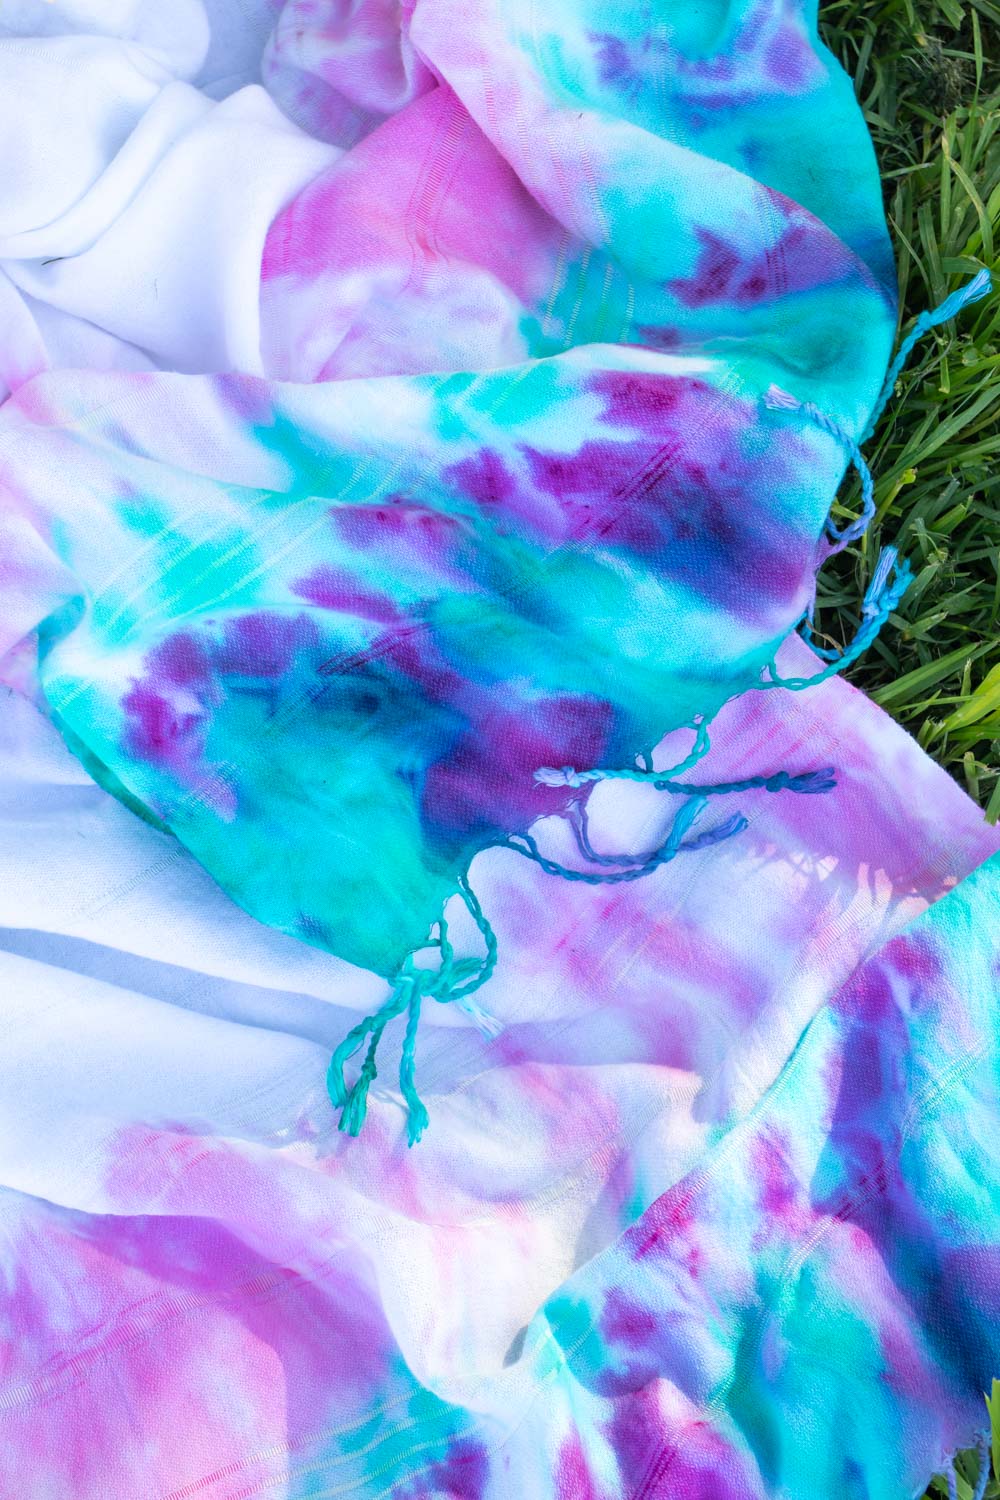 closeup of tie dye picnic blanket or towel with fringe